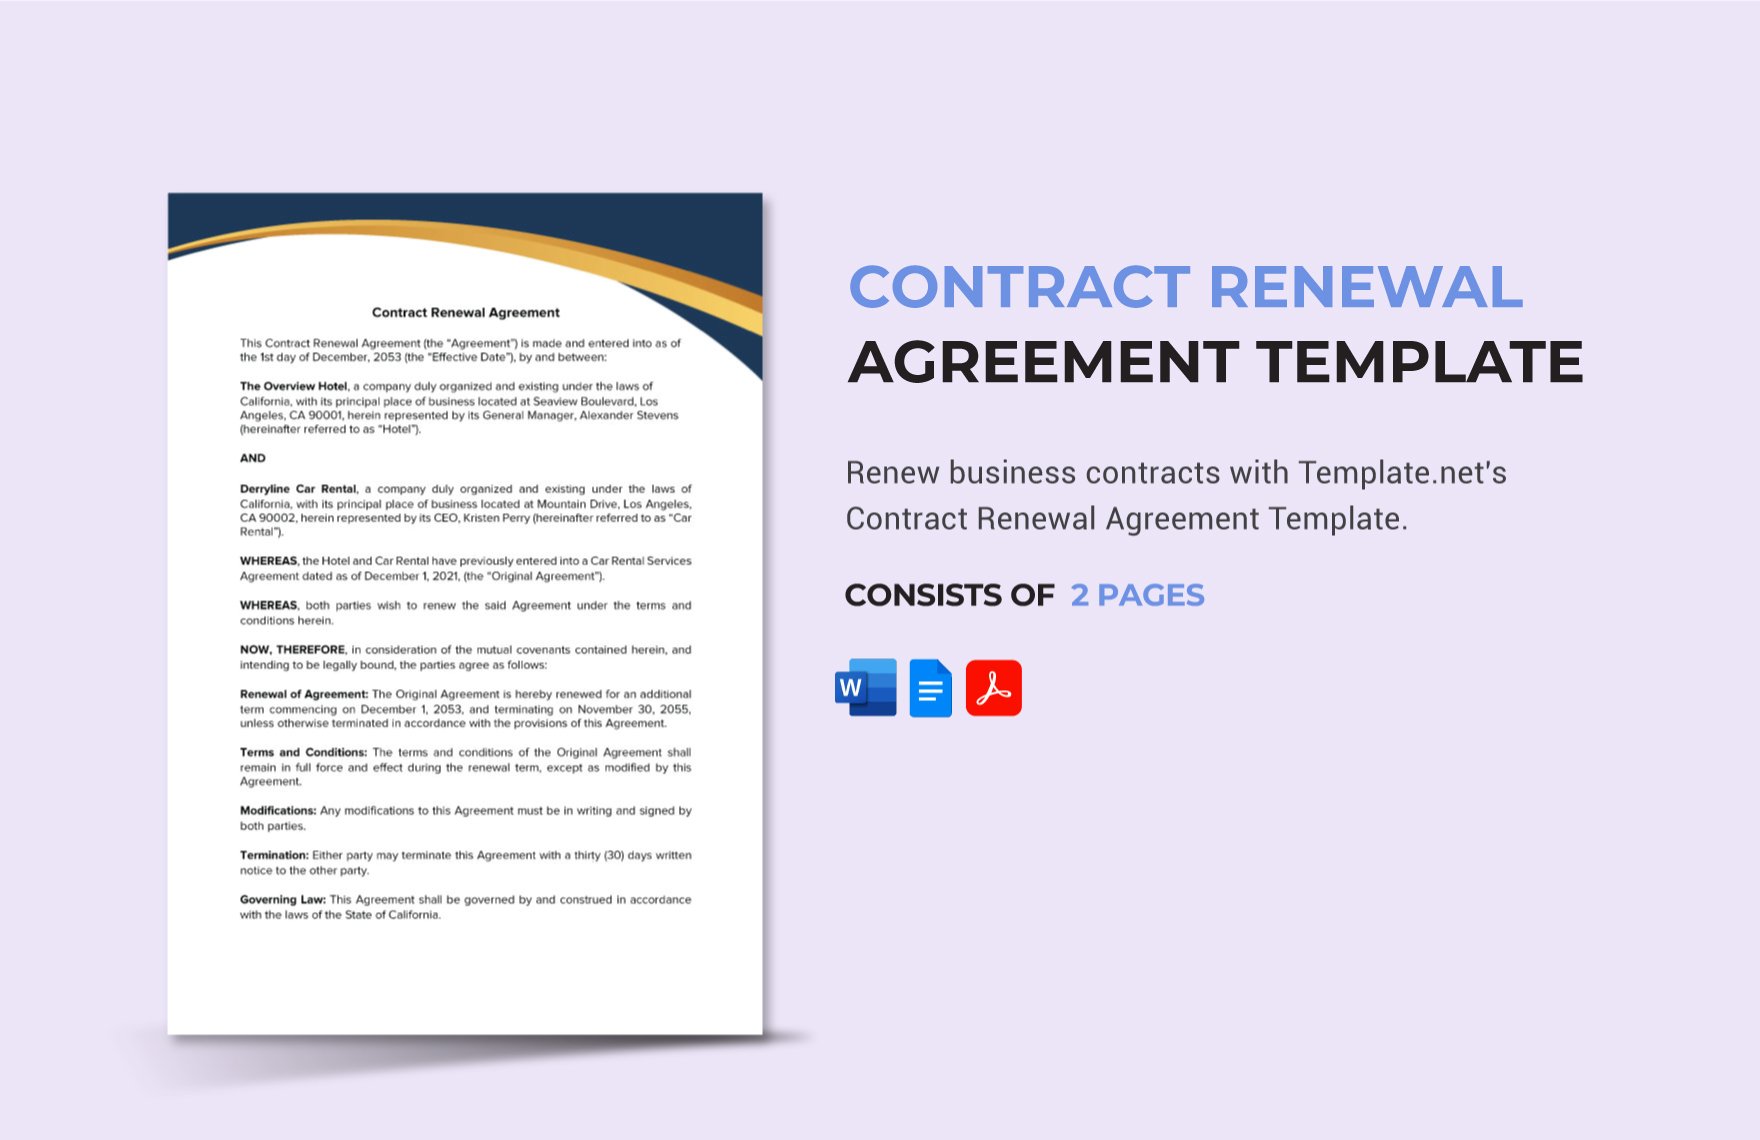 Contract Renewal Agreement Template